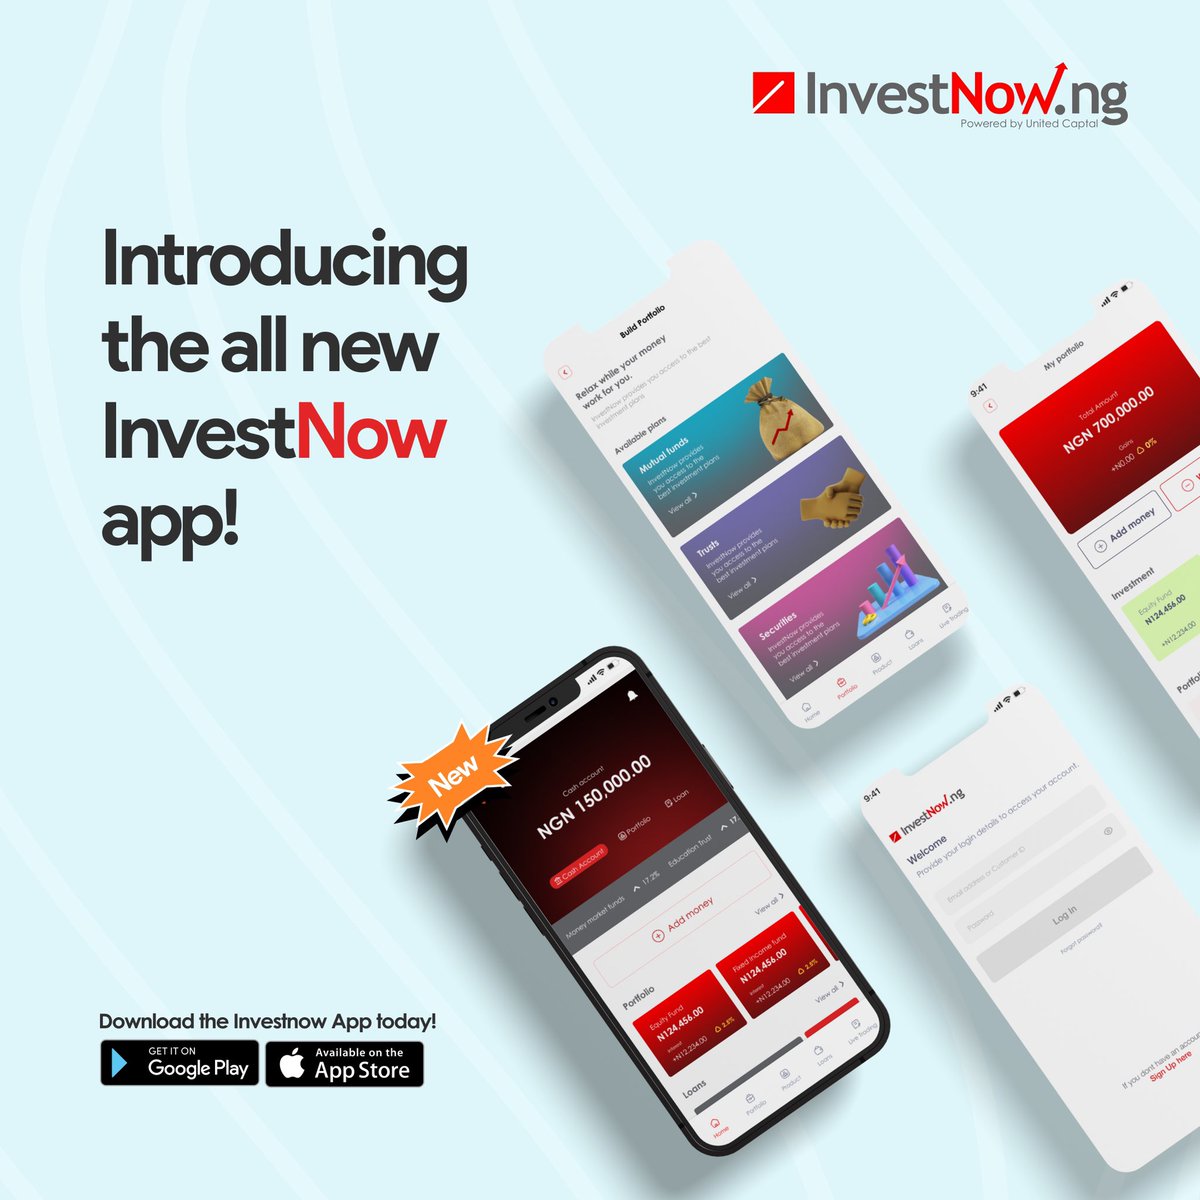 You asked and we listened!

Yes! InvestNow has a new & improved look and feel to make your investing experience even better.

To access the new InvestNow app, simply uninstall the old mobile app and download the new version on the iOS App Store and Google Play Store by searching…